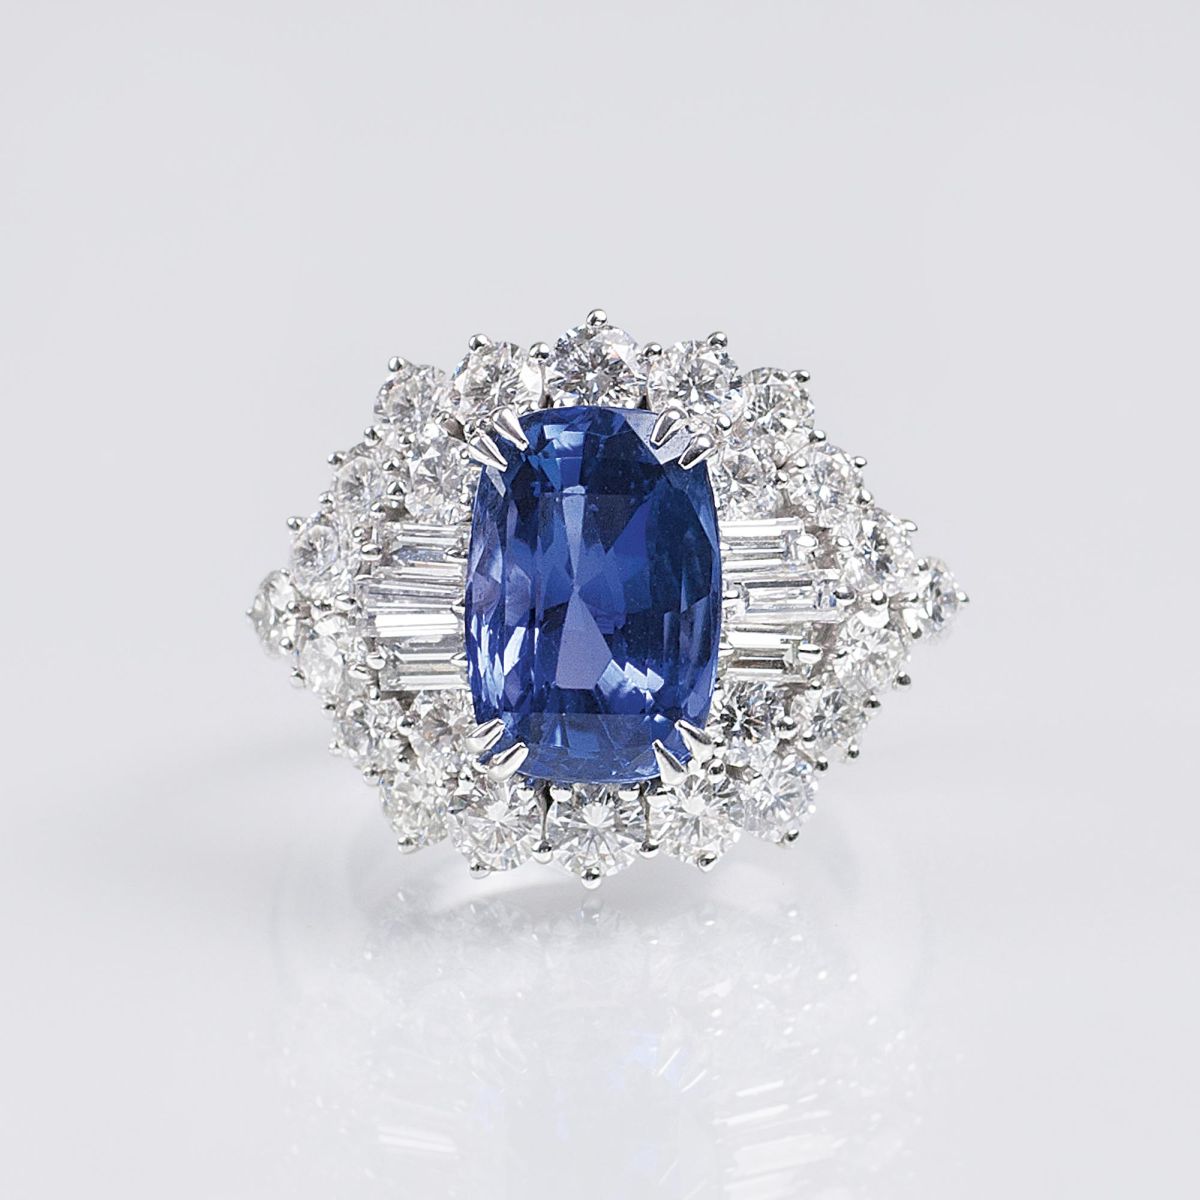 An extraordinary fine and natural Ceylon Sapphire with Diamonds